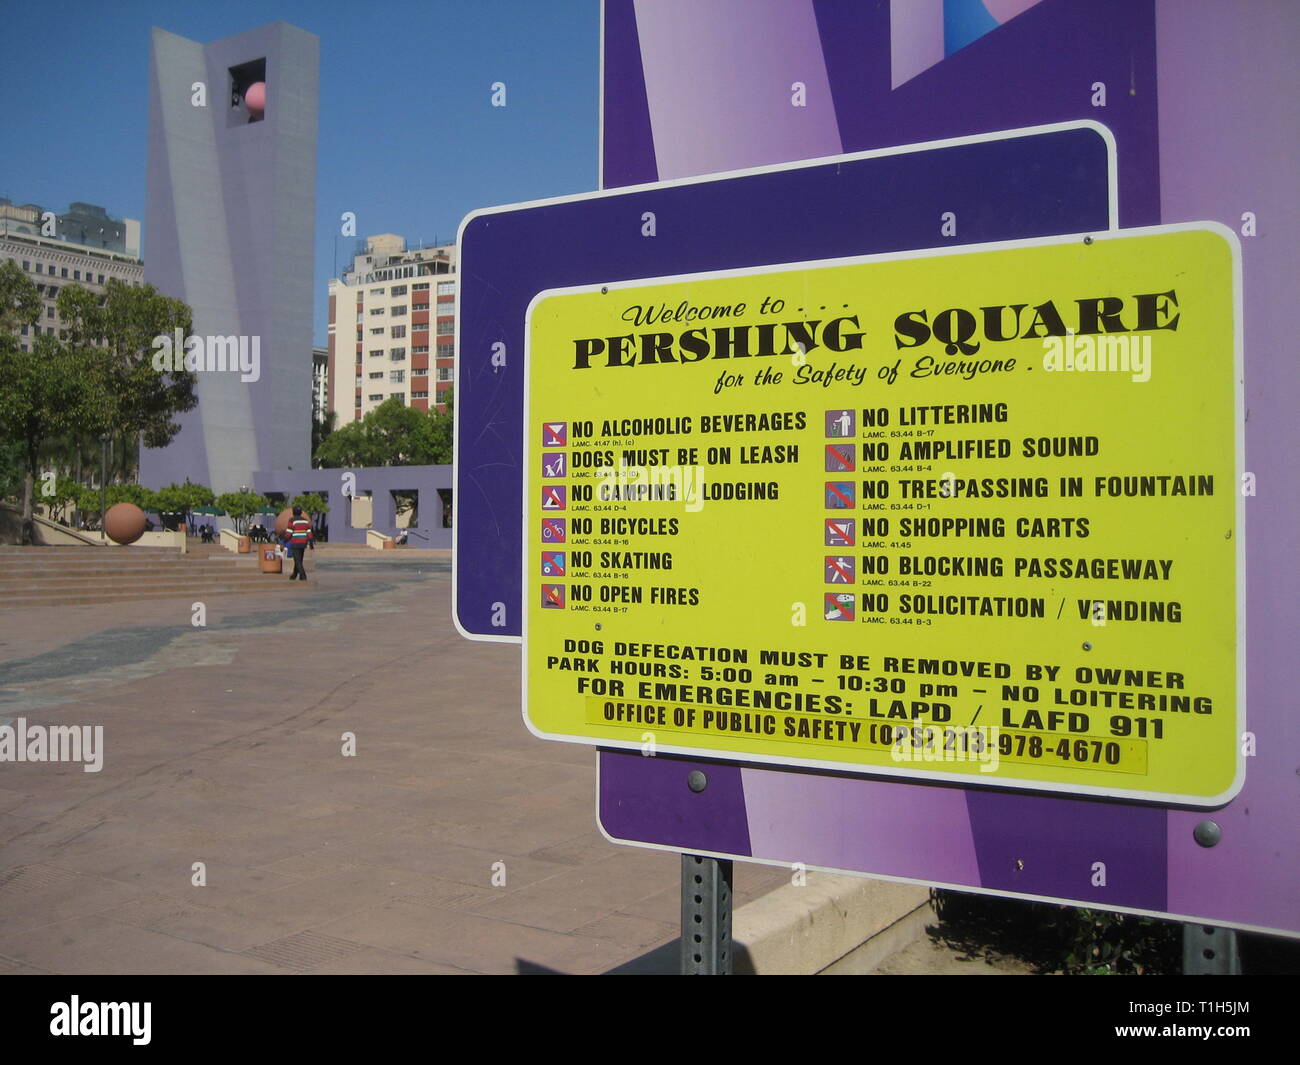 Pershing square rules sign Stock Photo